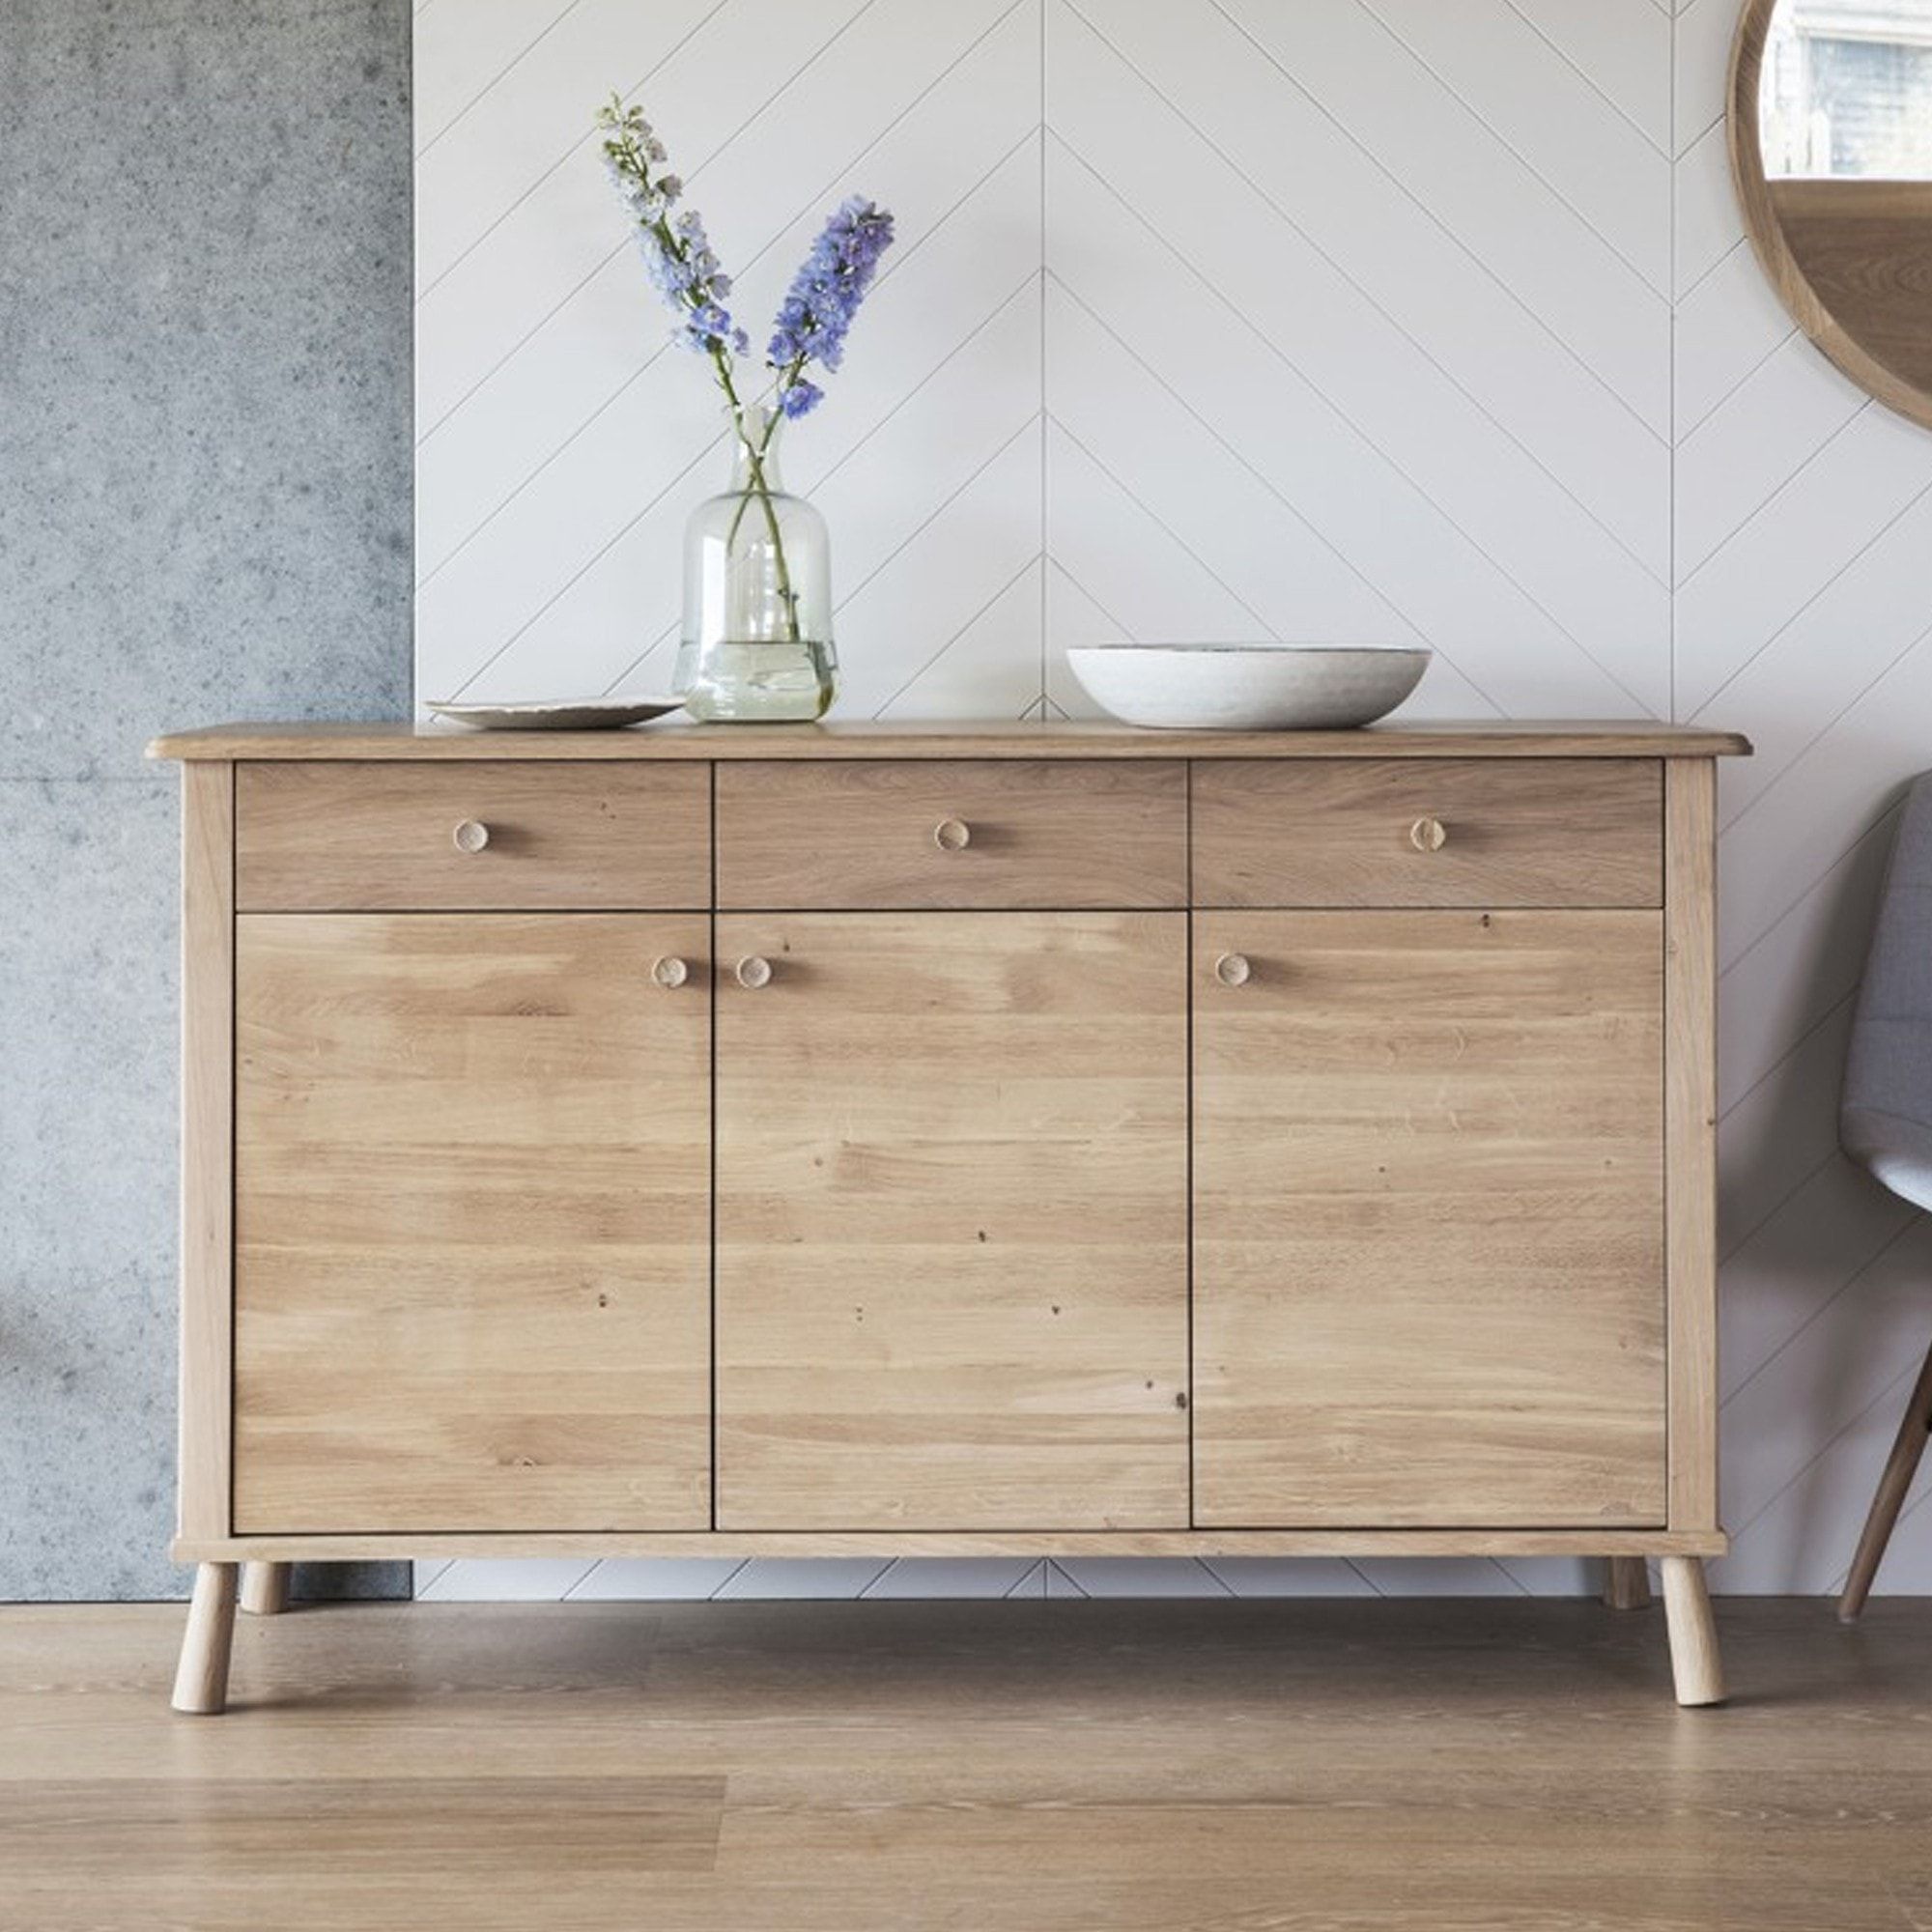 Wycombe 3 Door 3 Drawer Sideboard | Wooden Sideboards With Storage With Regard To Most Current Sideboards With 3 Drawers (View 4 of 15)